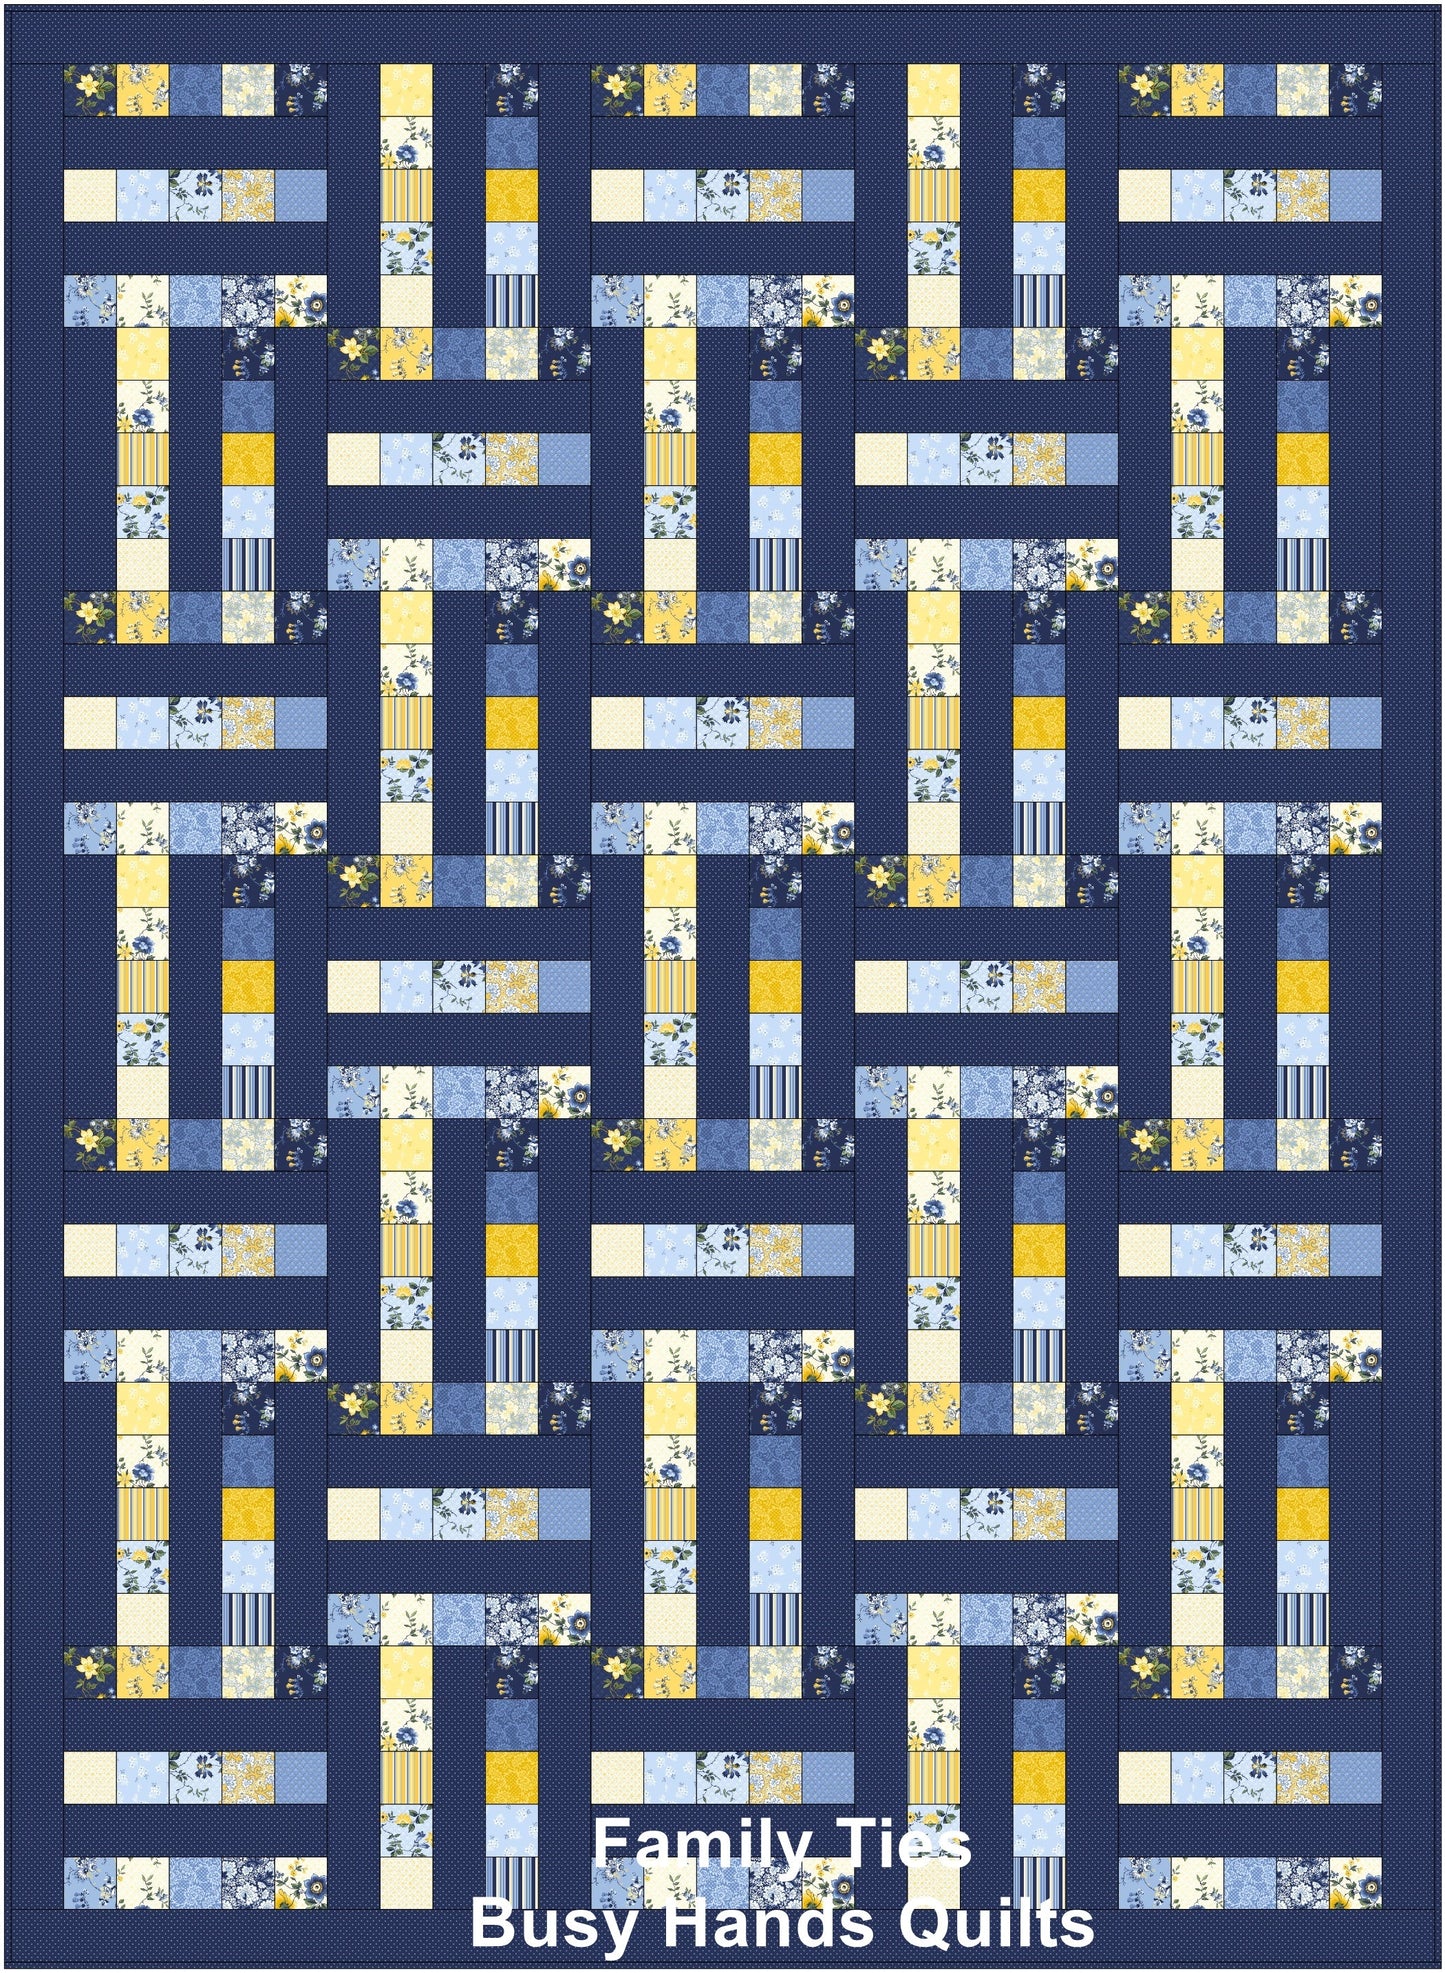 Family Ties Quilt Pattern PDF DOWNLOAD Busy Hands Quilts $12.99